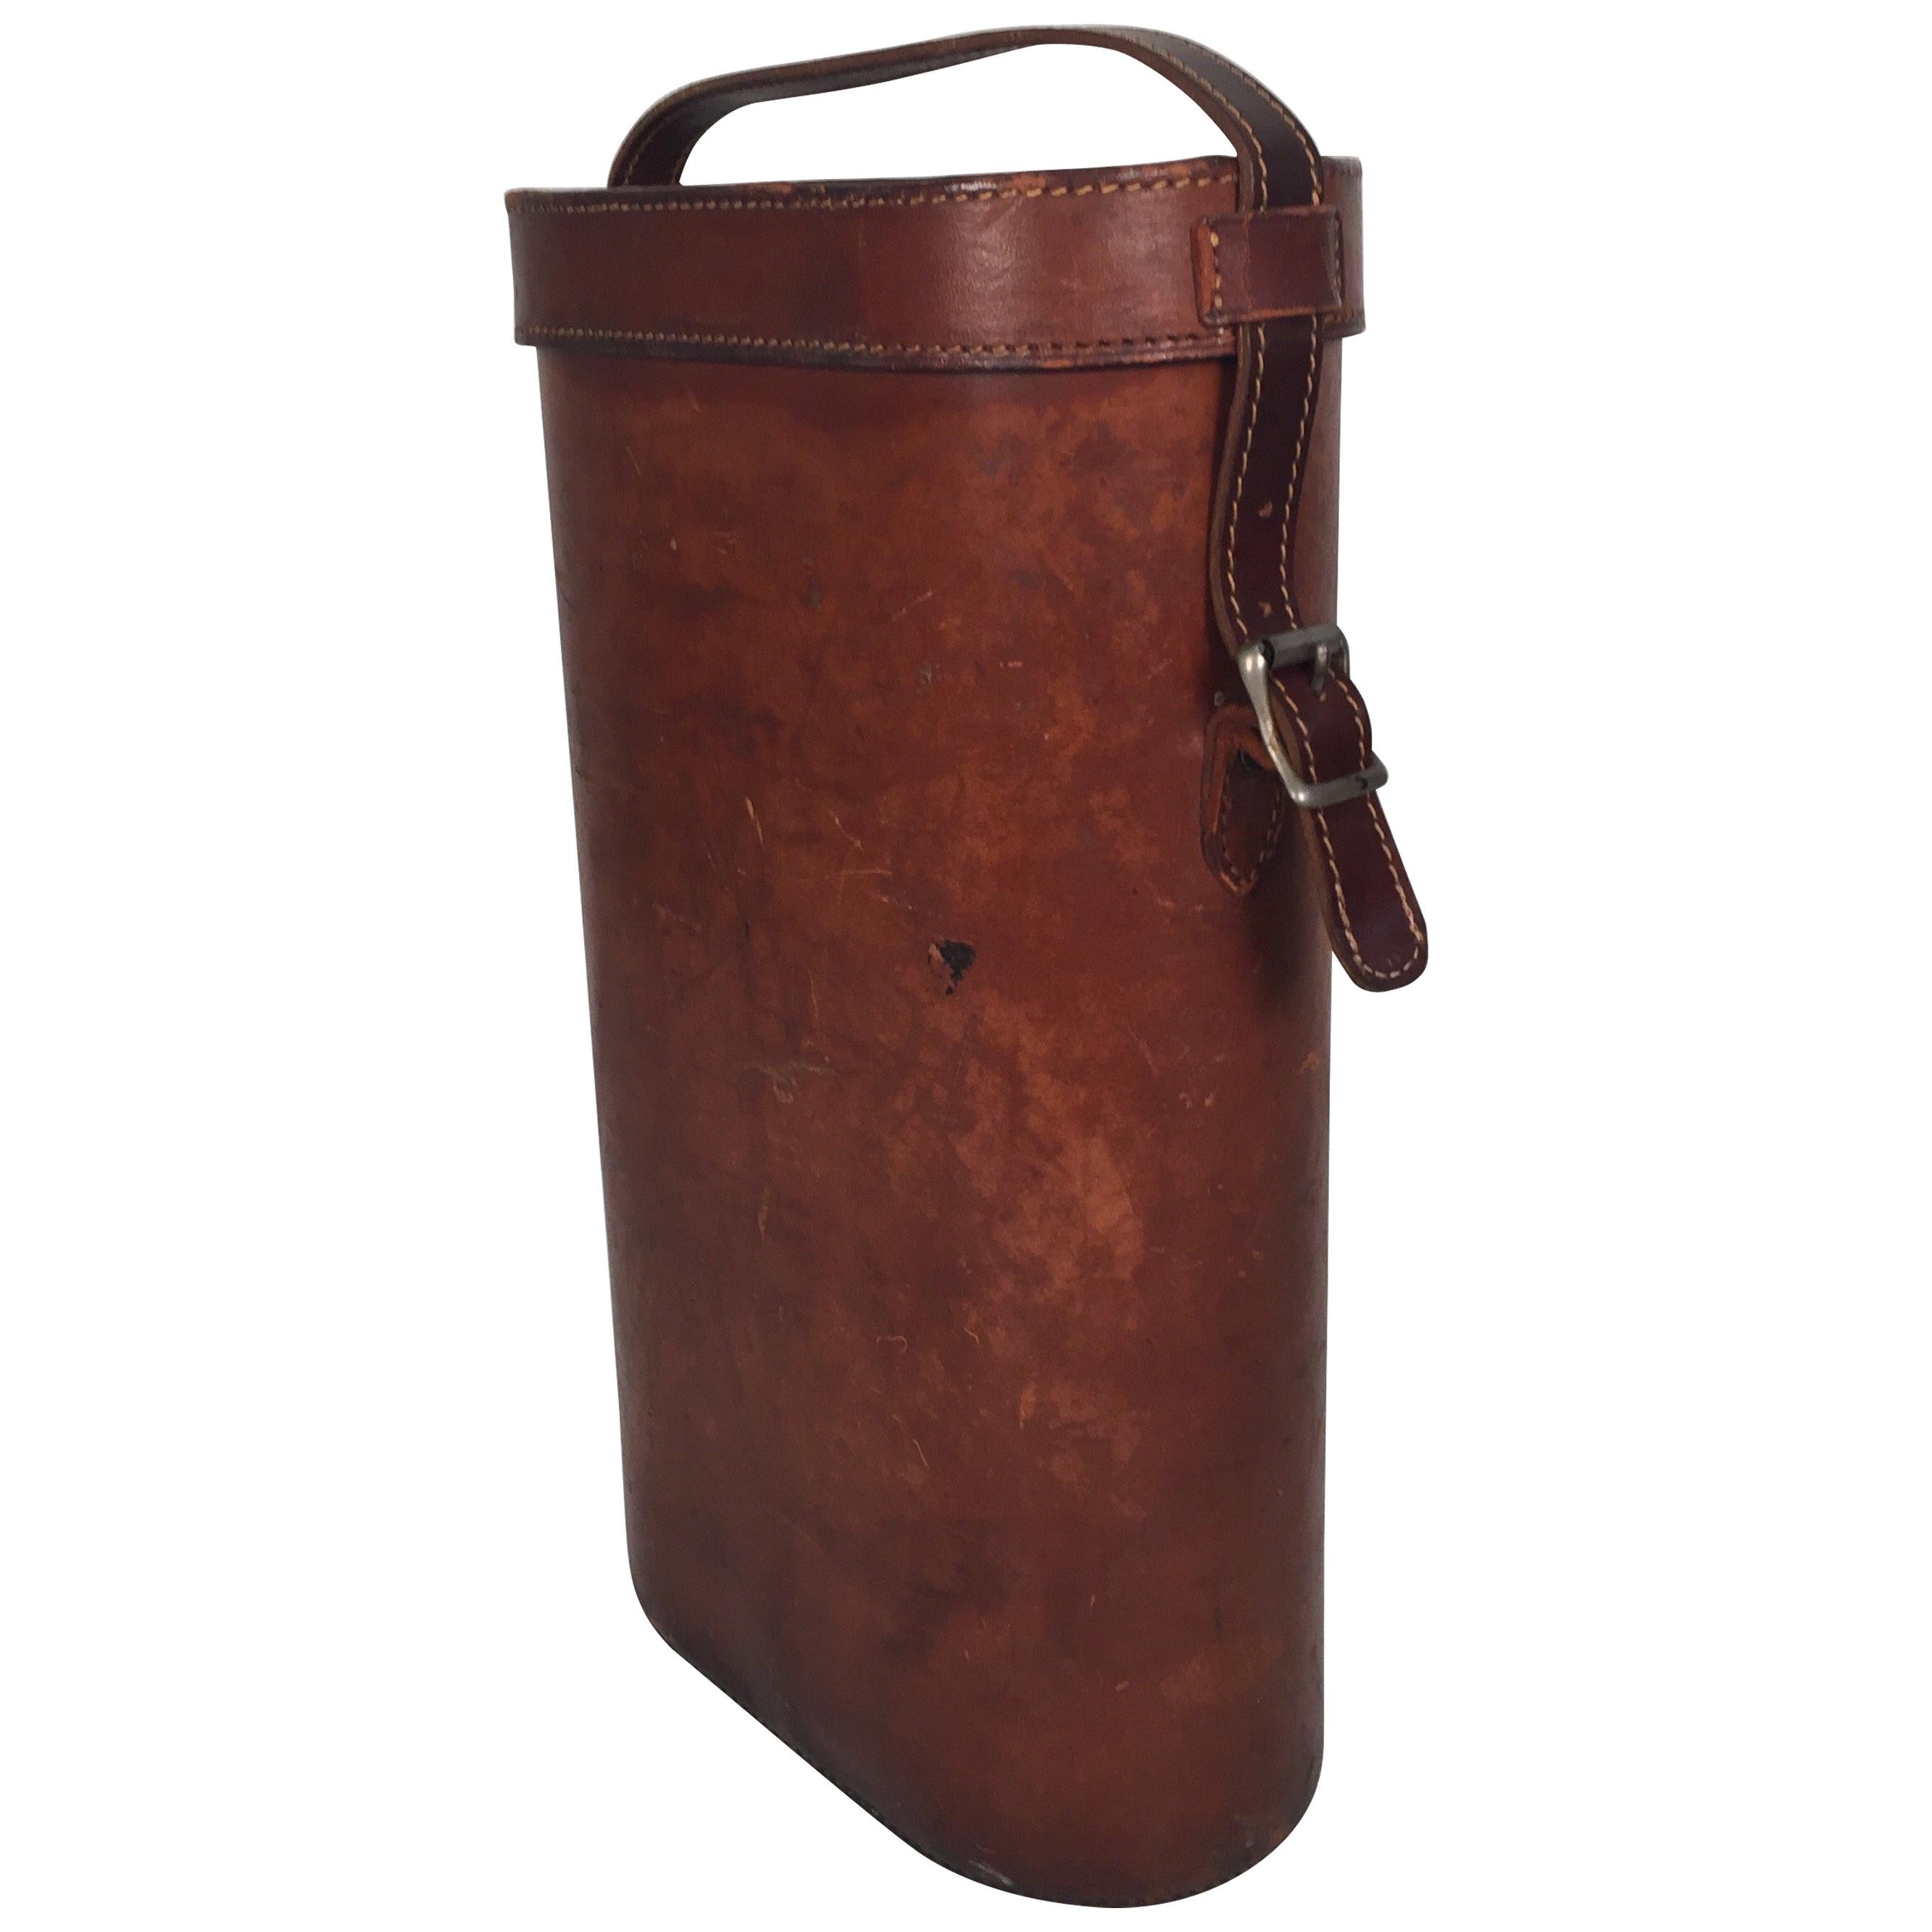 Vintage Leather Two Bottle Wine Carrier, circa 1940s-1950s